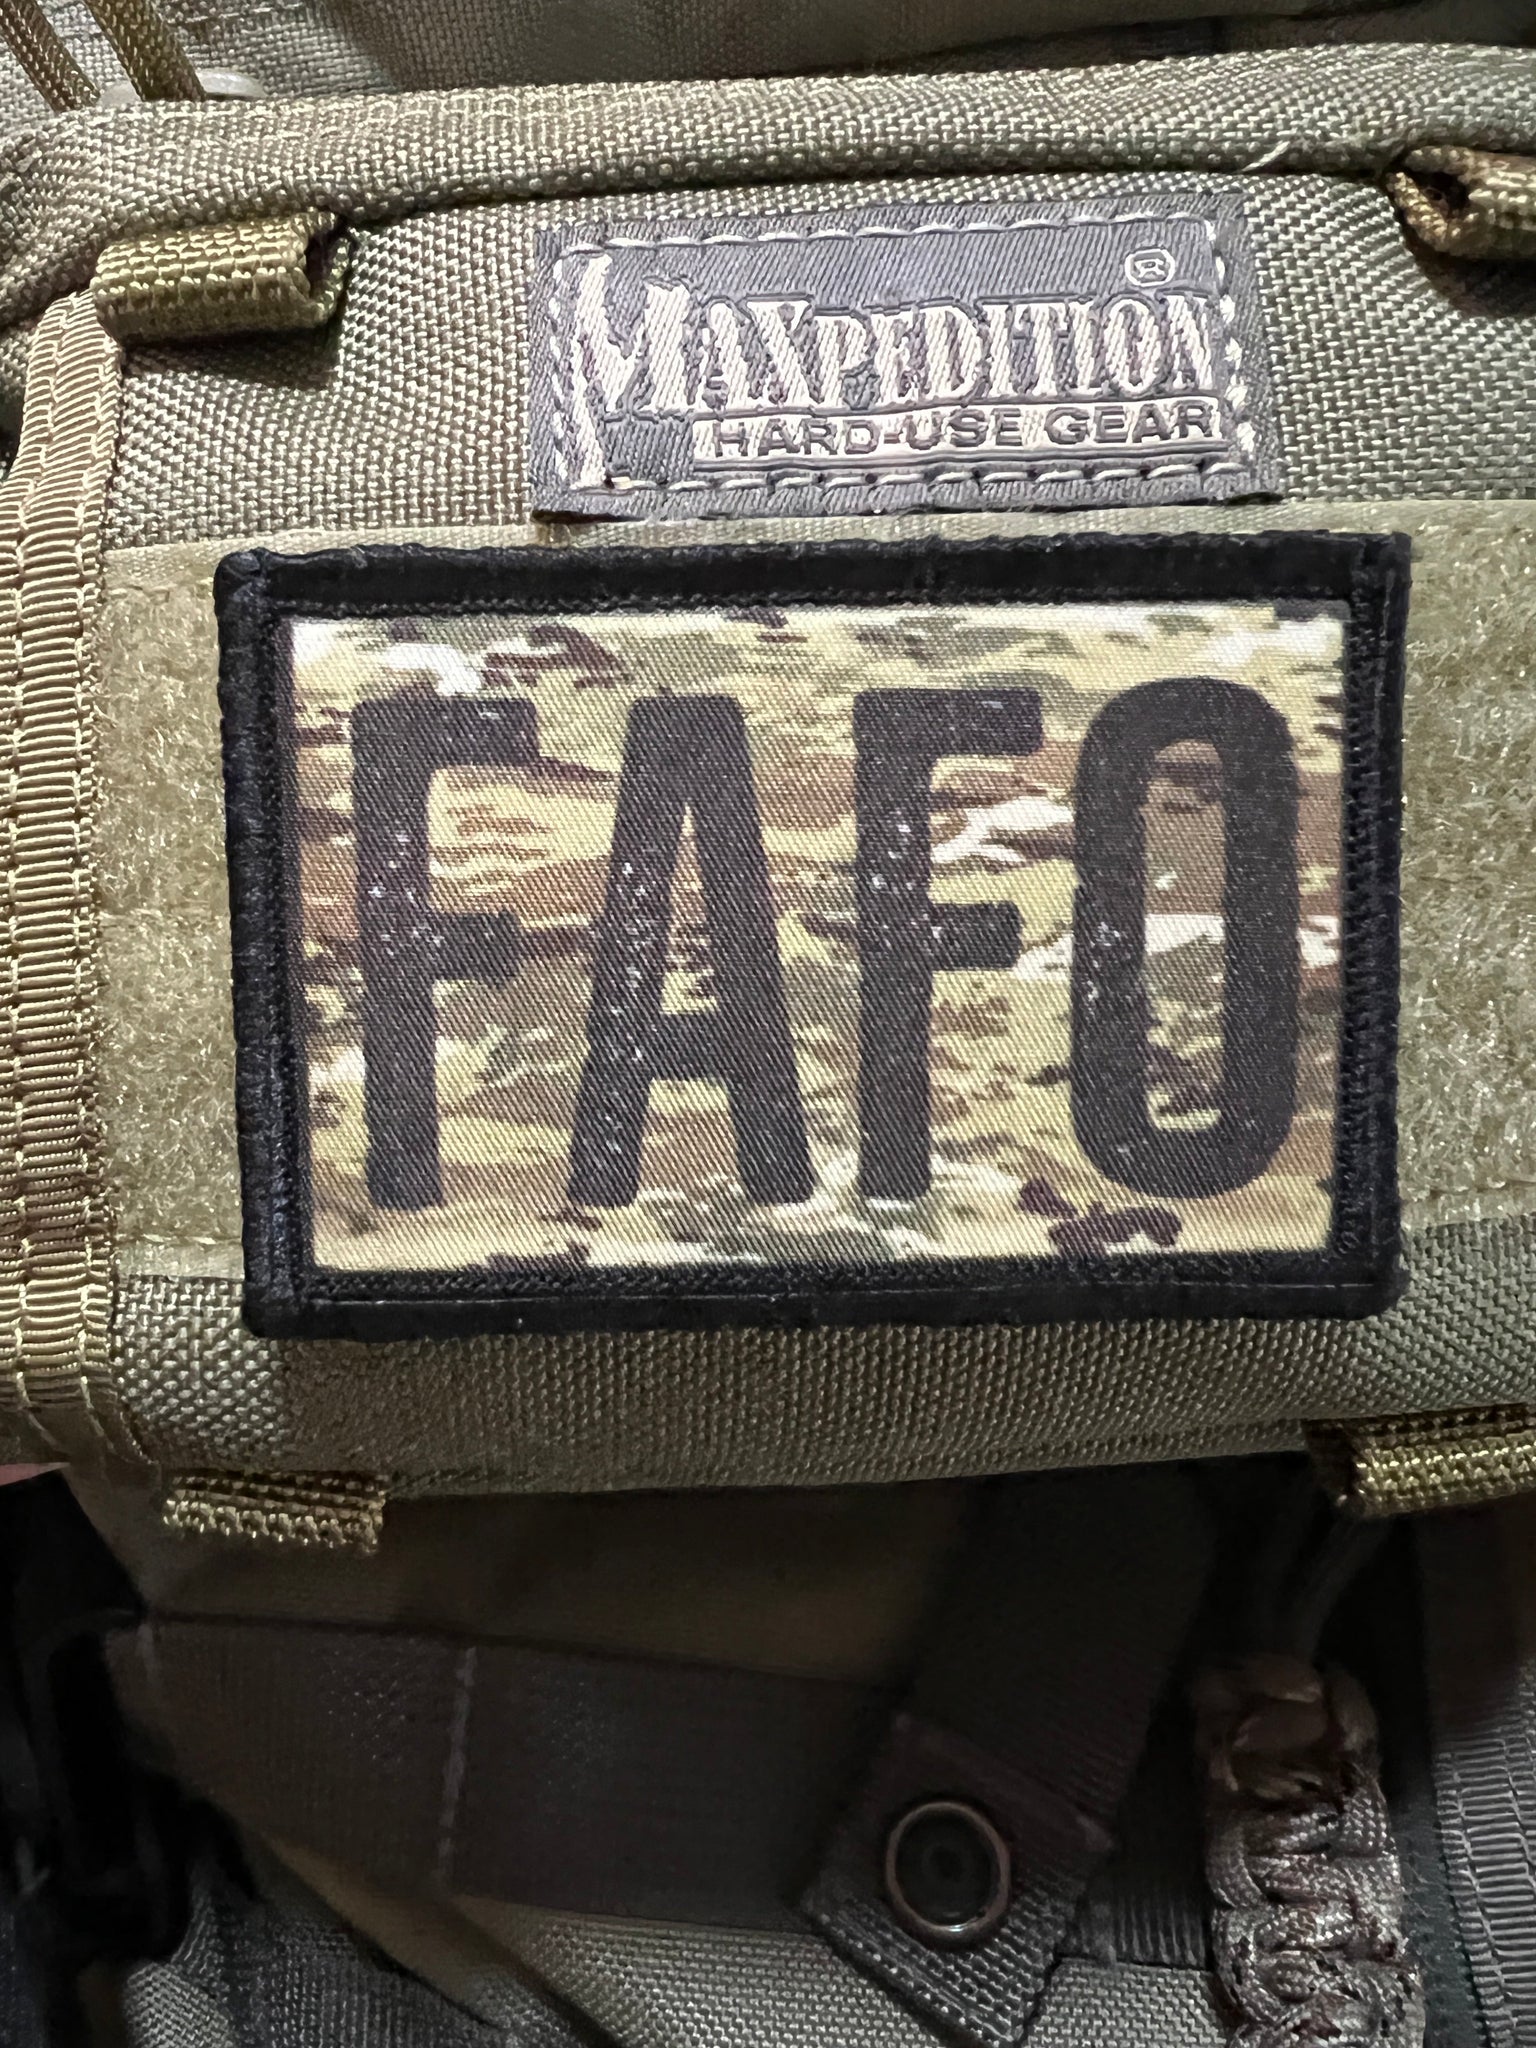 FAFO Patch and American Made Hat Combo, Camo